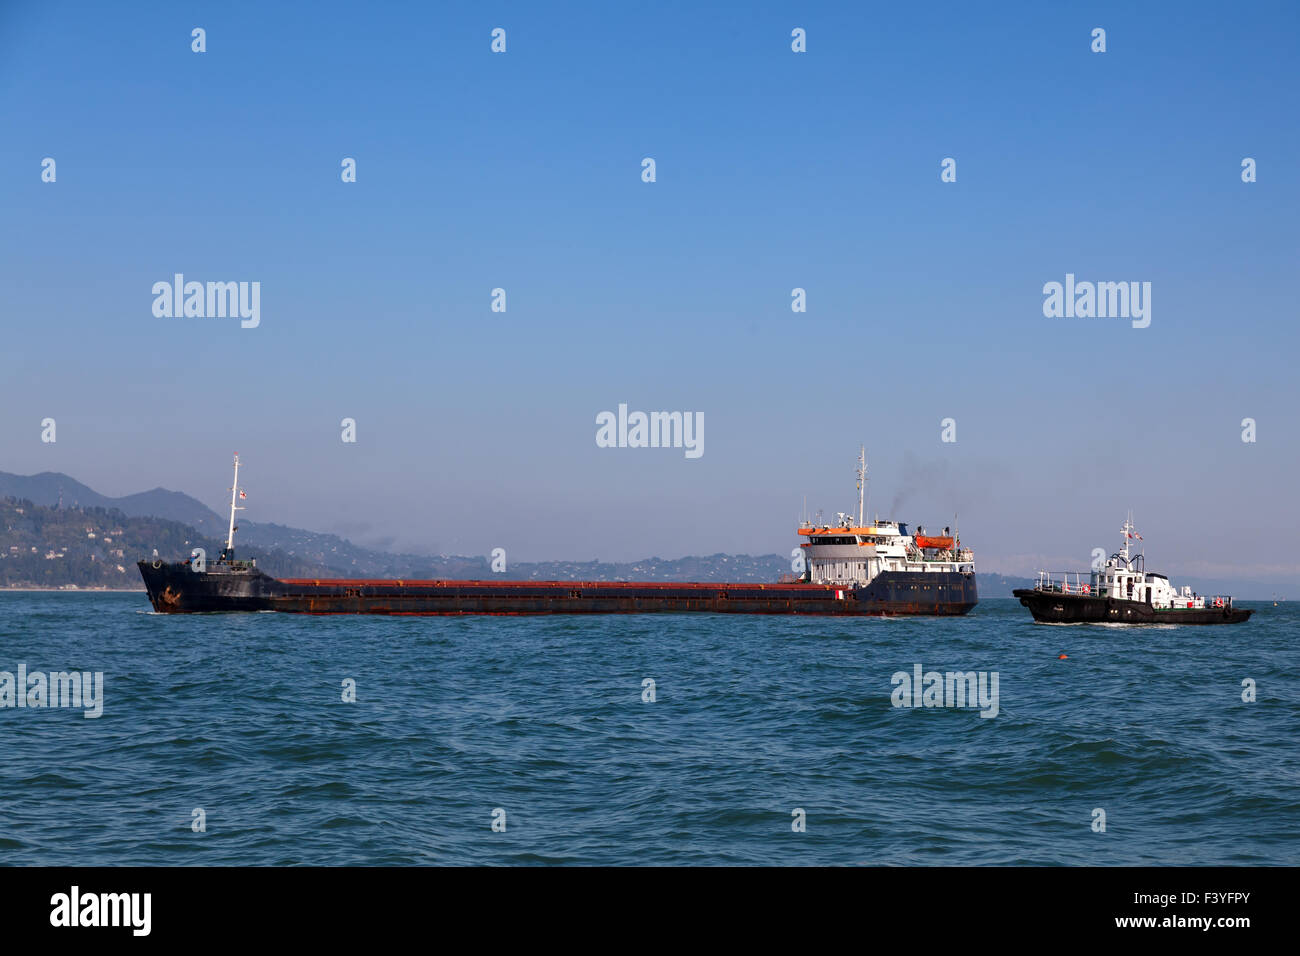 Bulk-carrier ship and tugboat Stock Photo